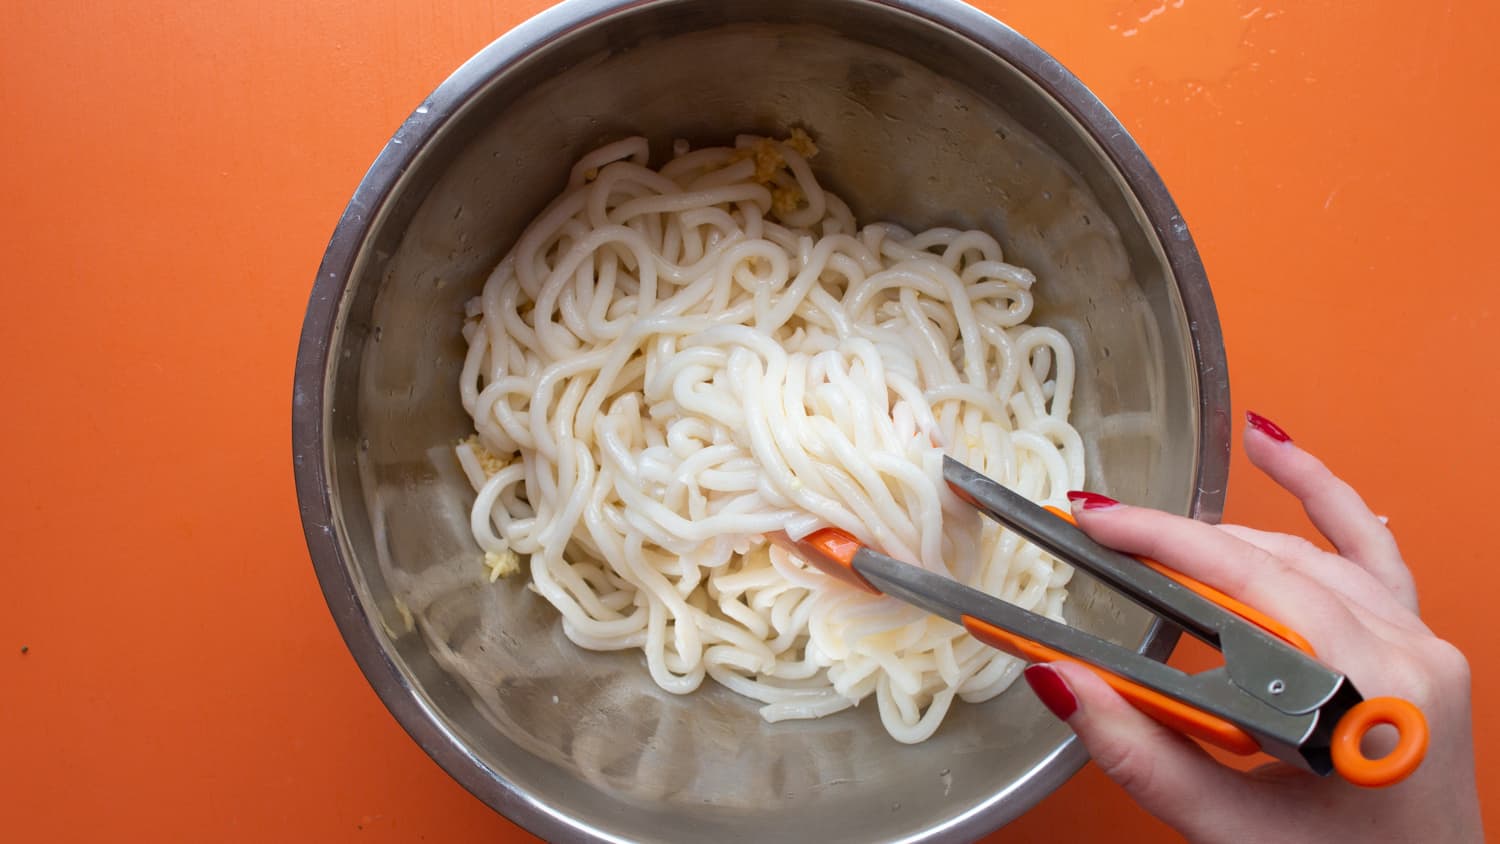 Noodles ready in metal pan being mixed with orange tongs